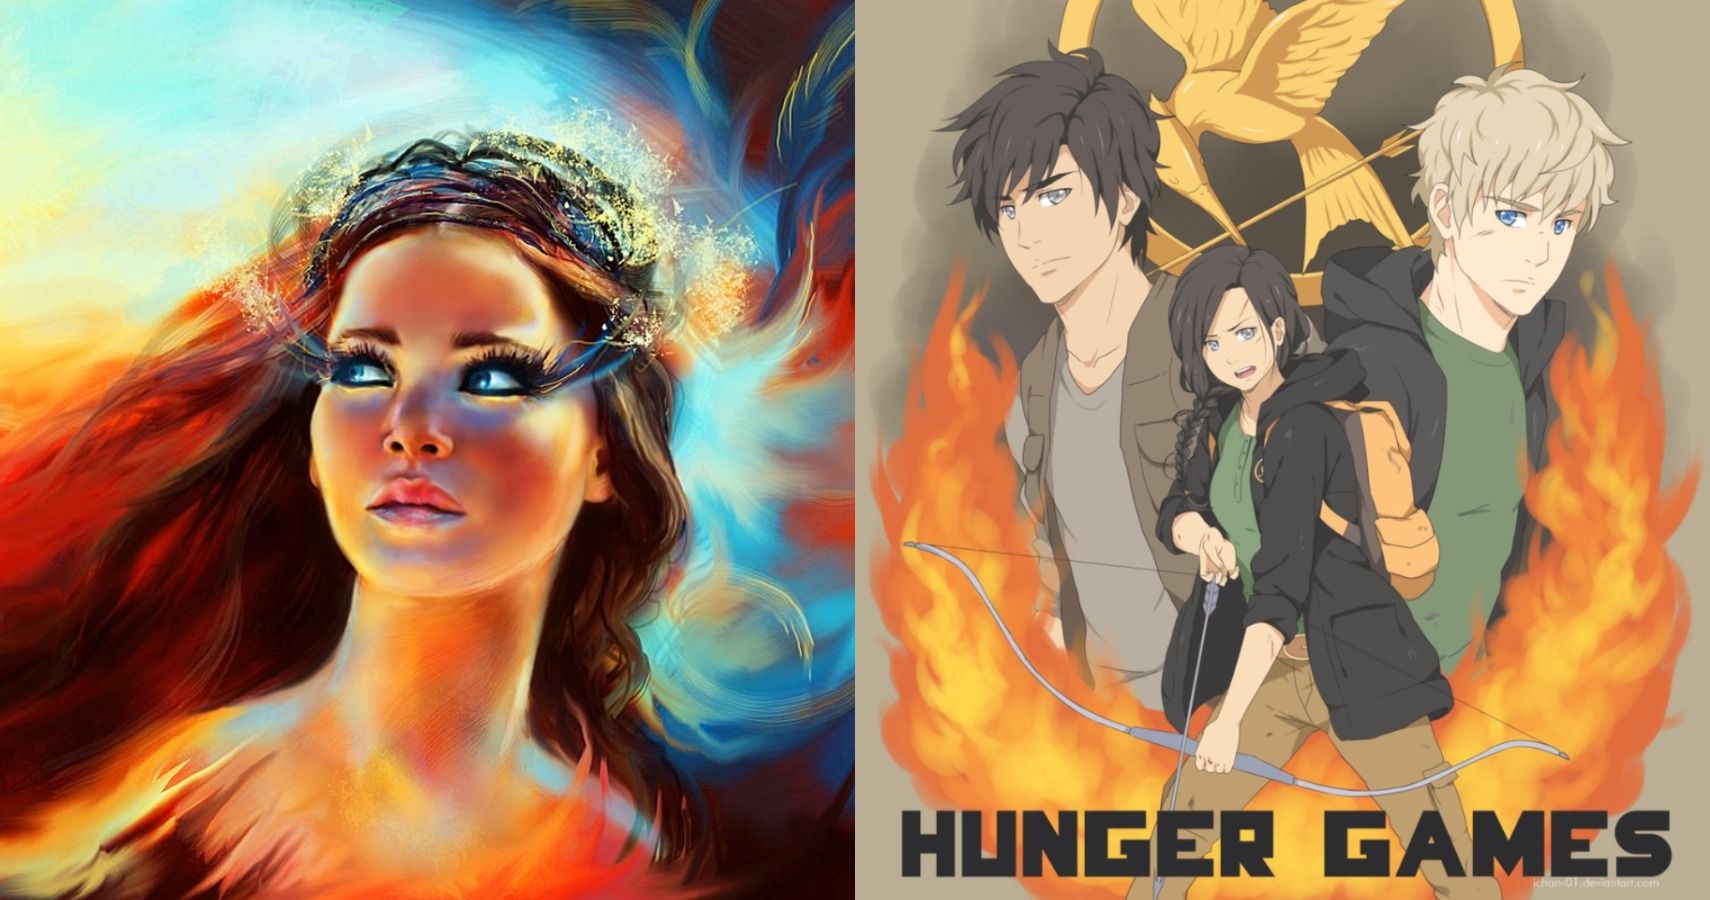 Hunger Games Family (If It Was An Anime.) | Anime Amino